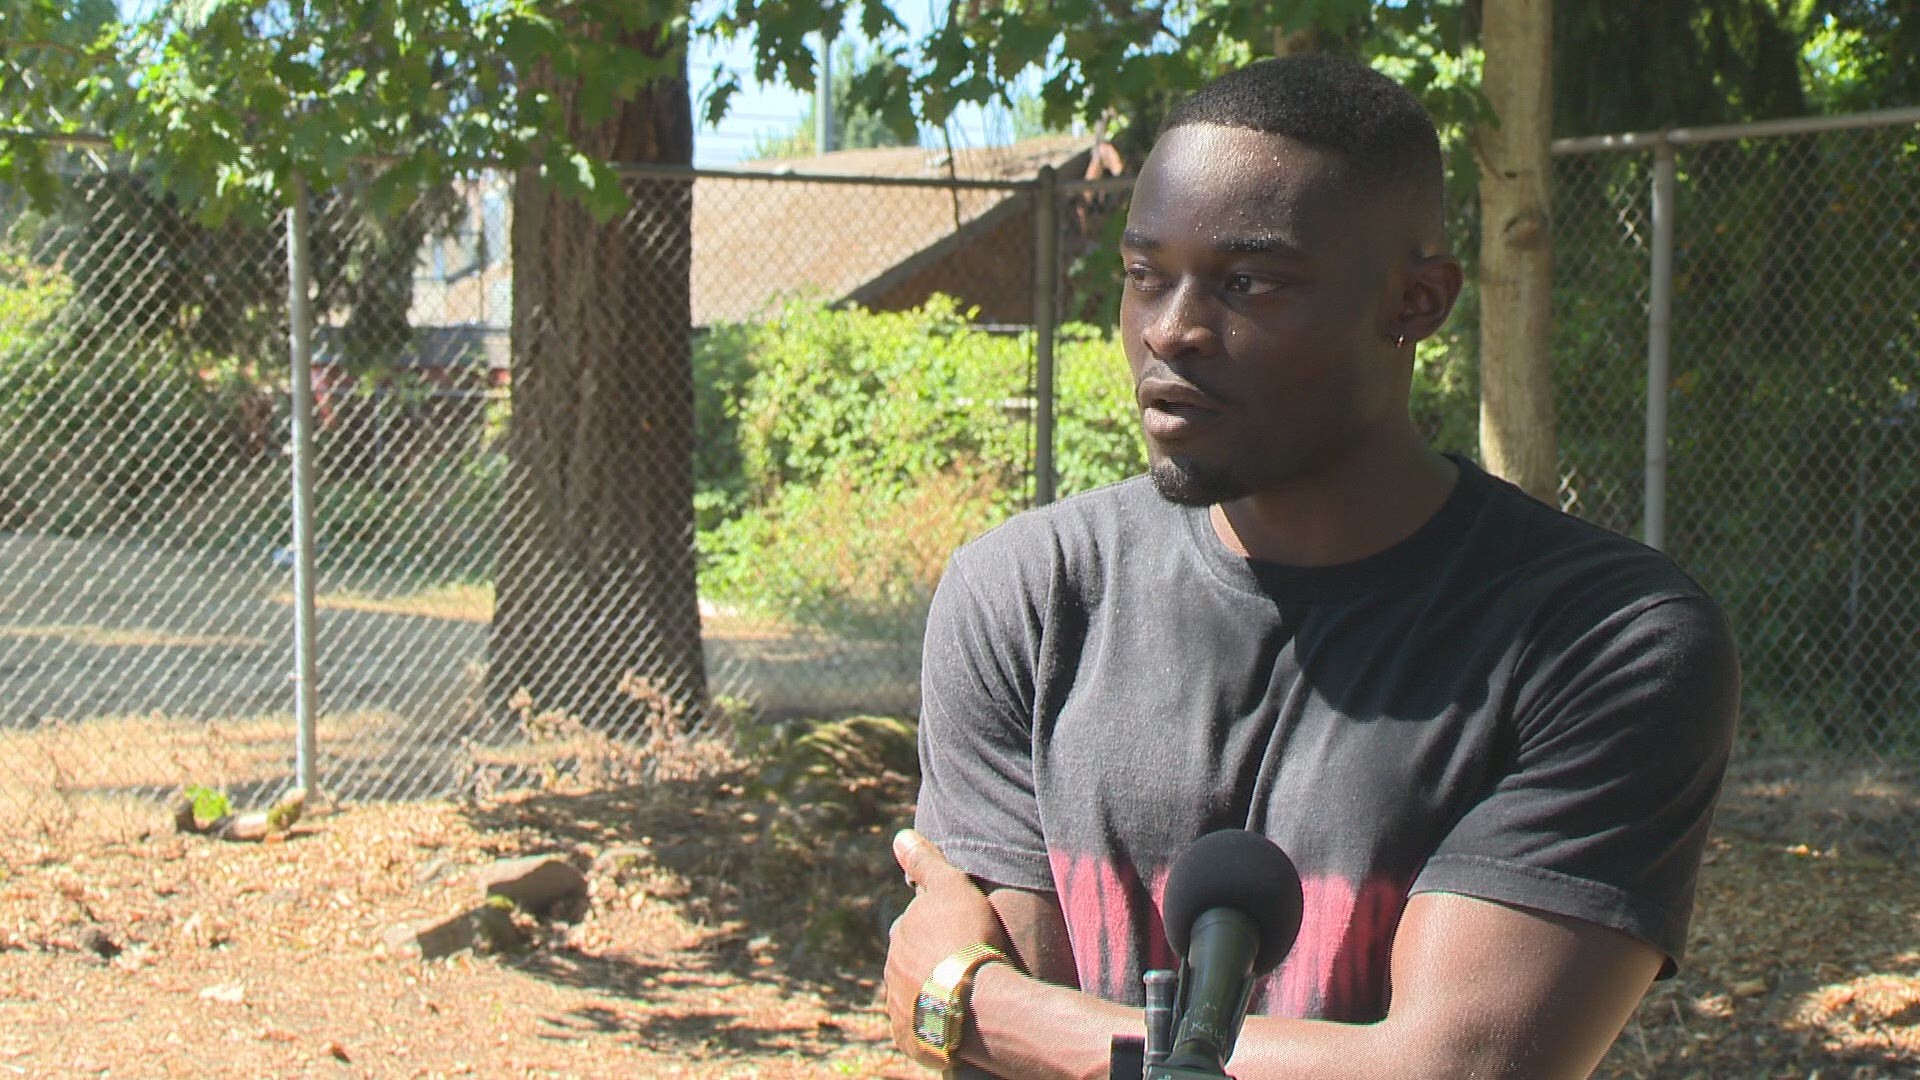 Chido Nmereole's Project Floyd started with him cleaning up trash after nightly Portland protests. His next project focuses on cleaning up a community garden.